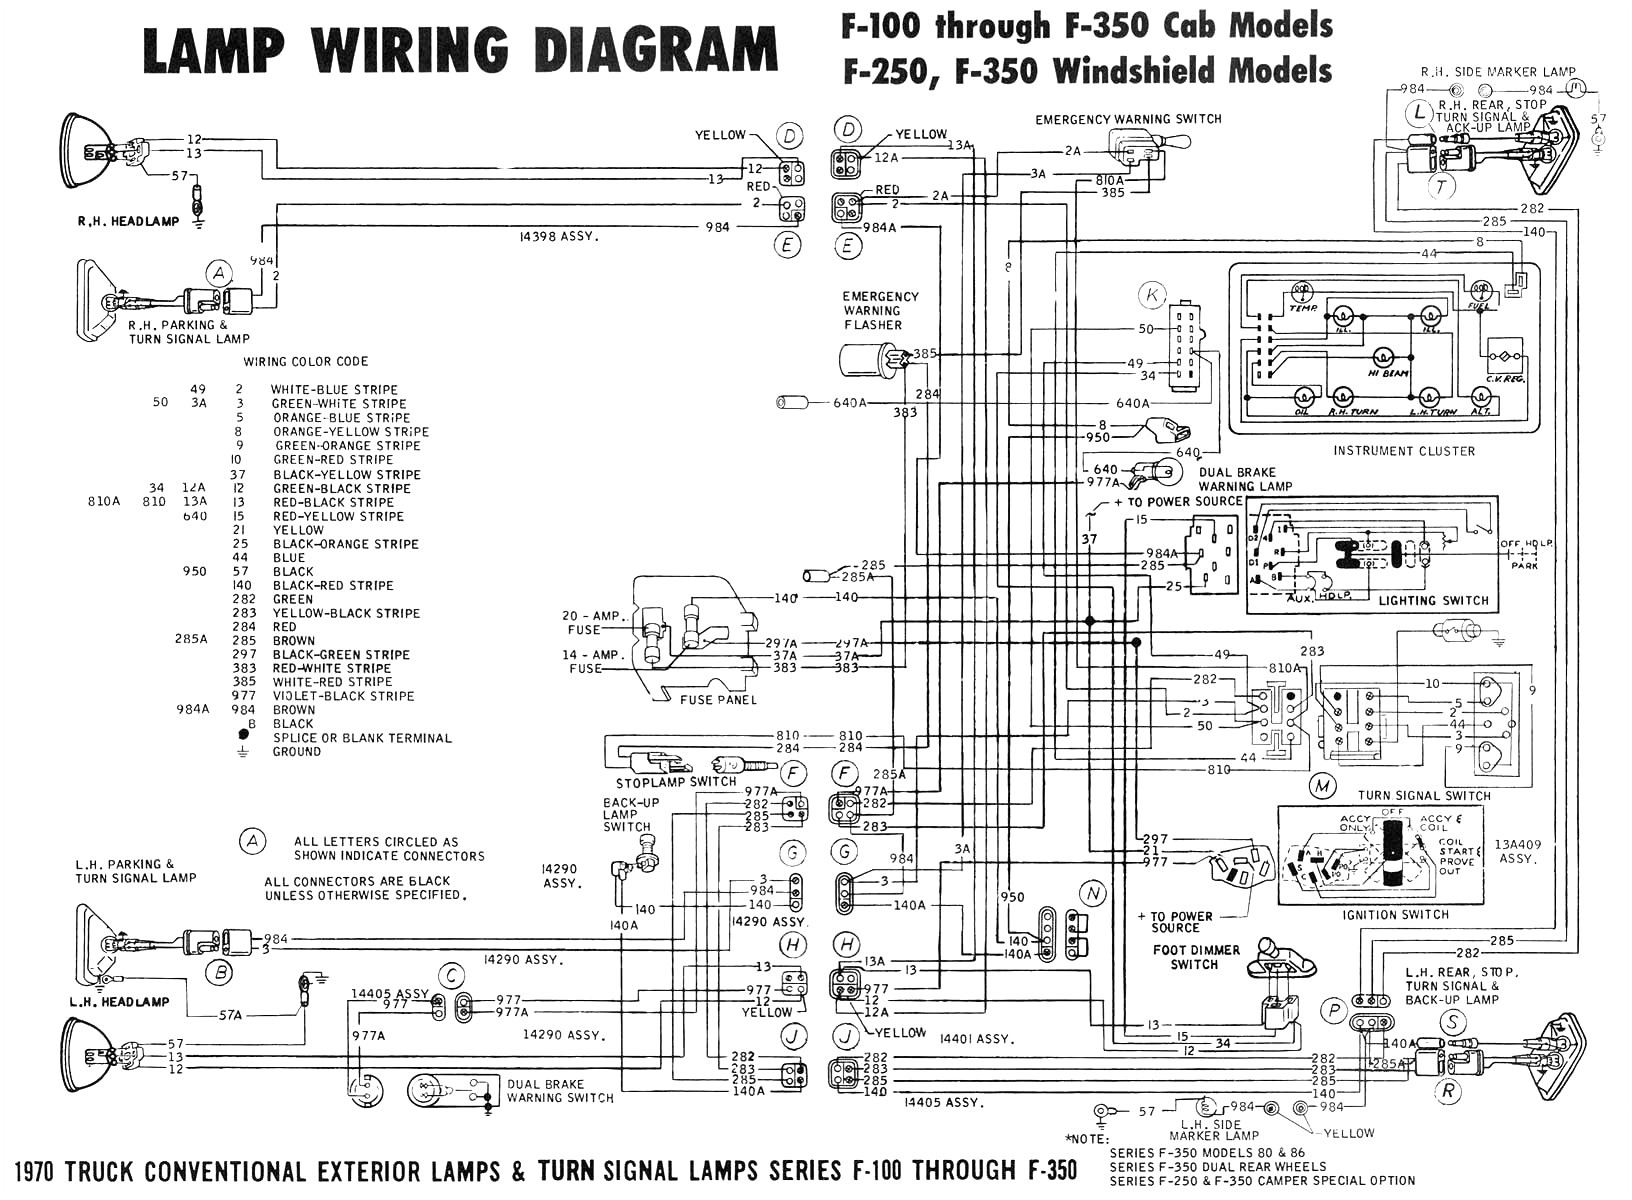 99 ford f350 wiring diagram wiring diagram article review 1970 f350 master diagram